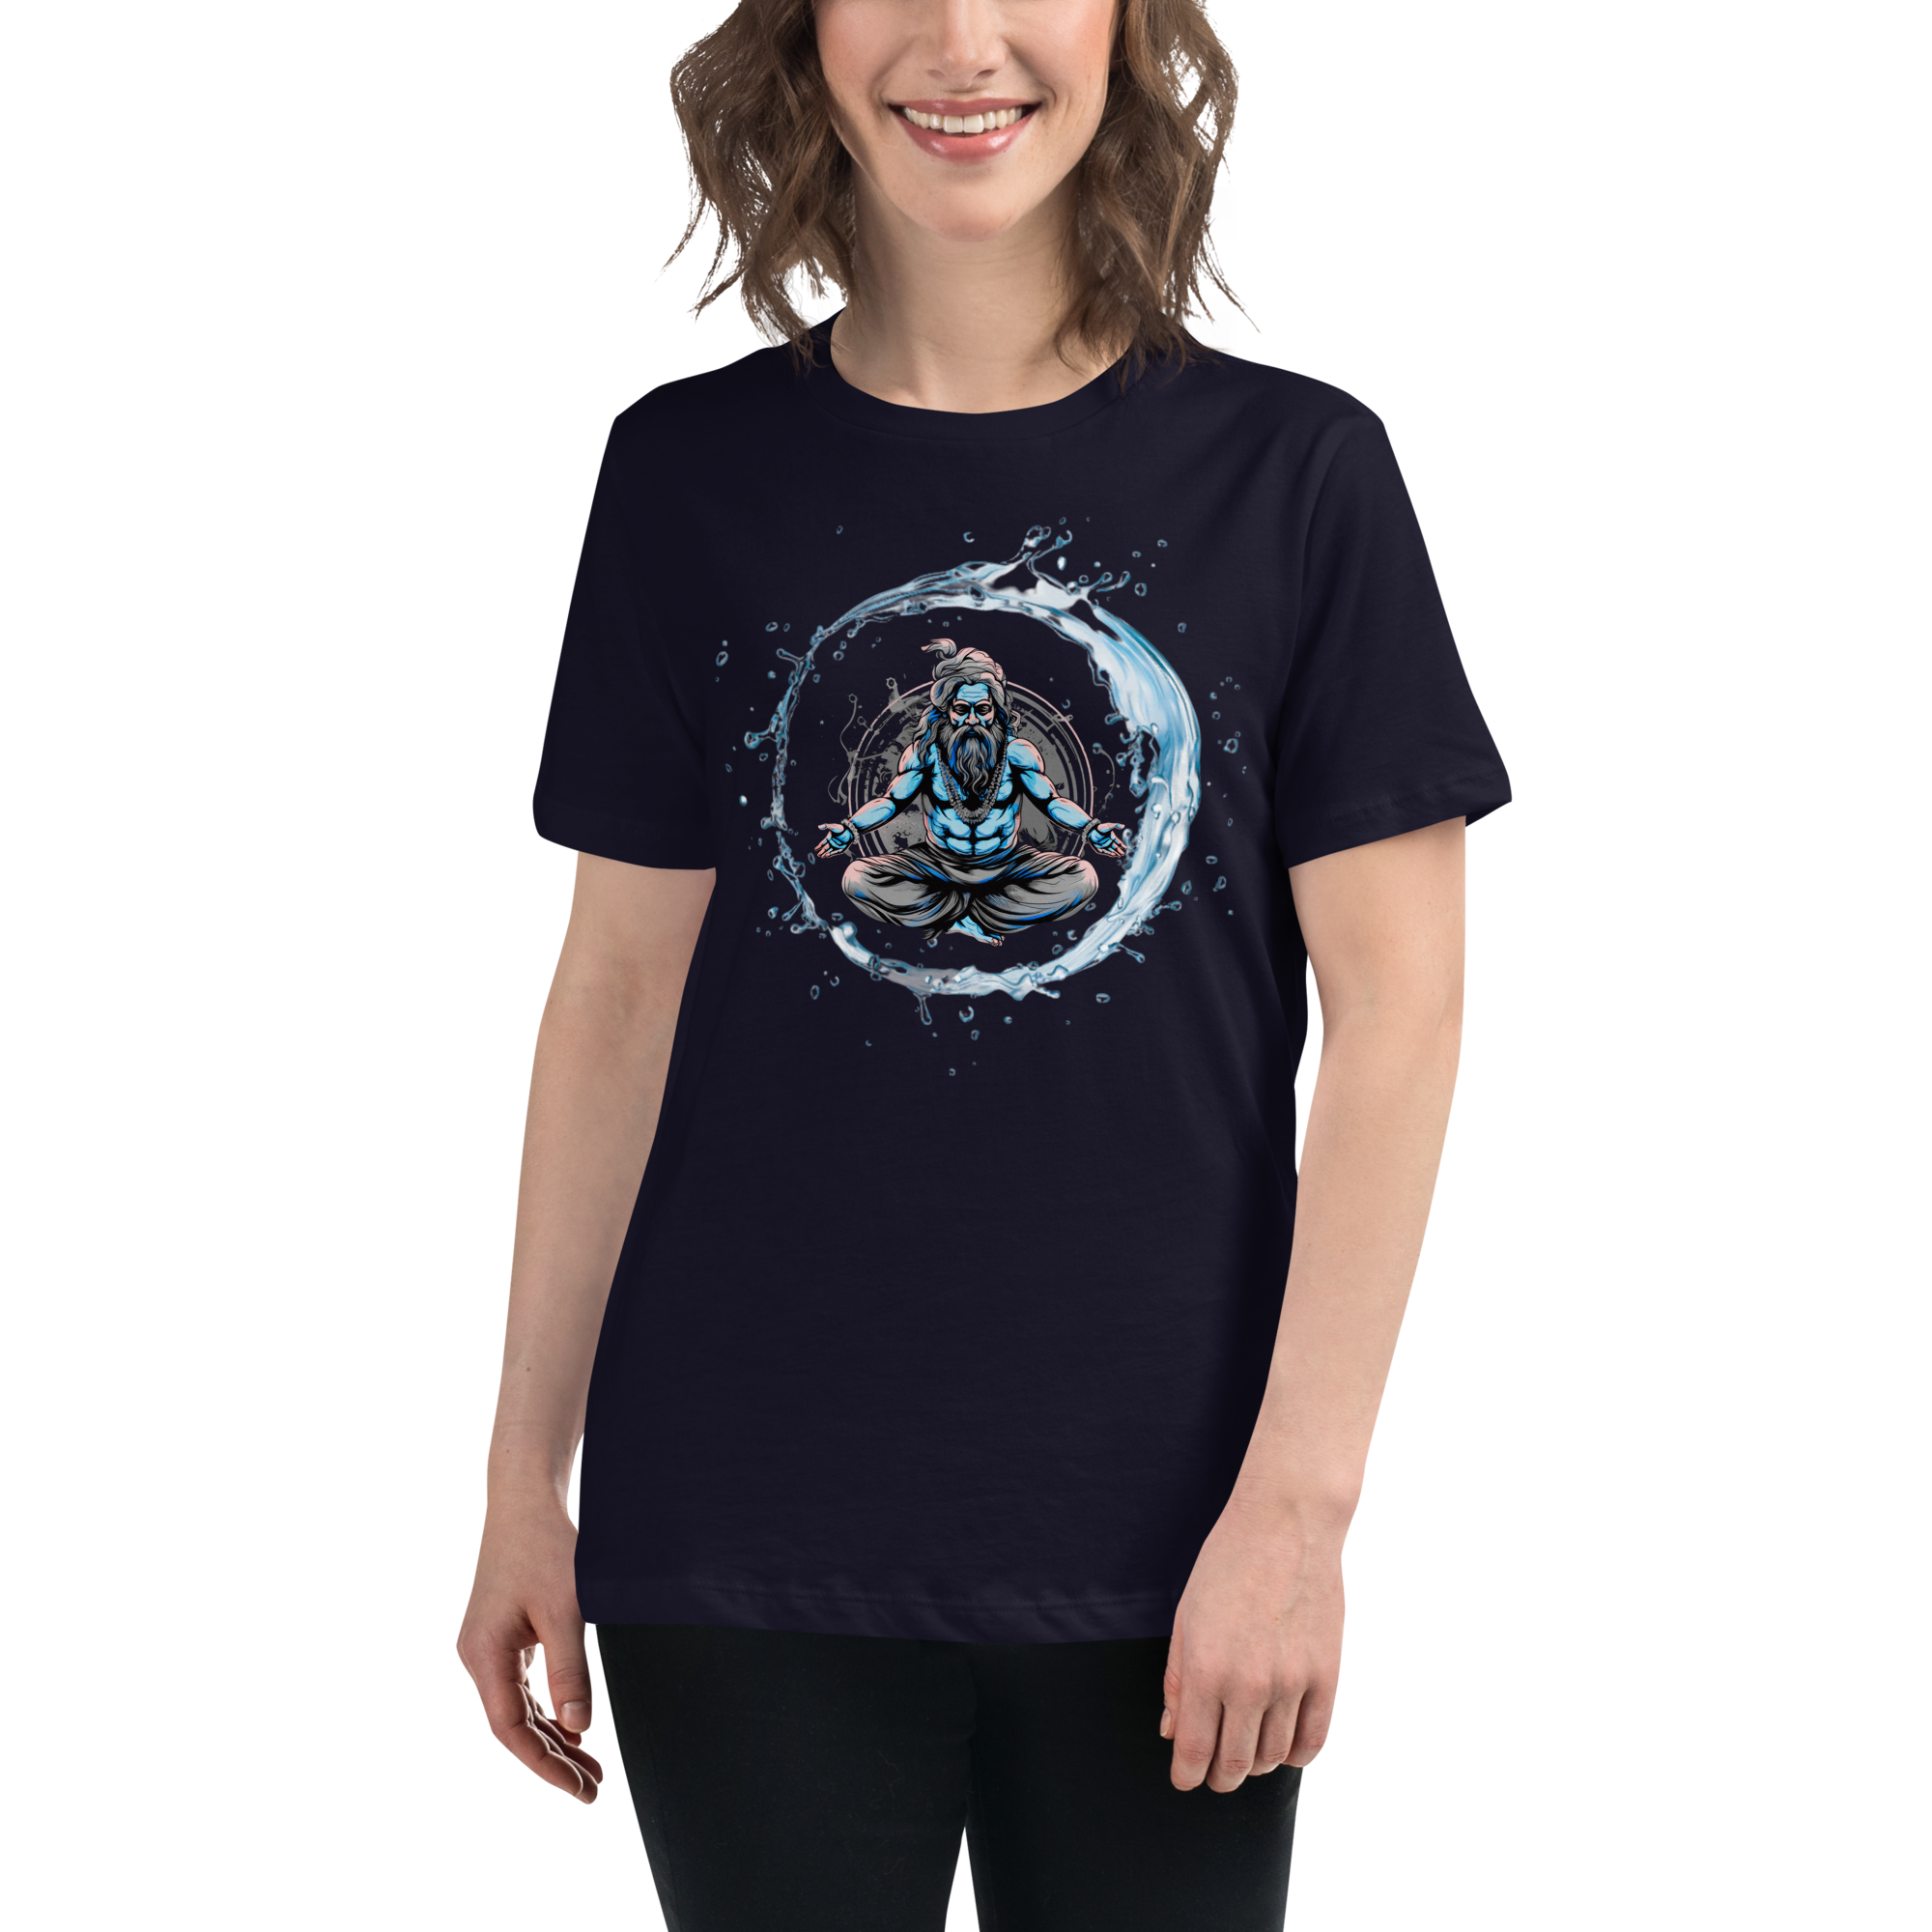 "Be like water" Women's Relaxed T-Shirt by IndiOdyssey